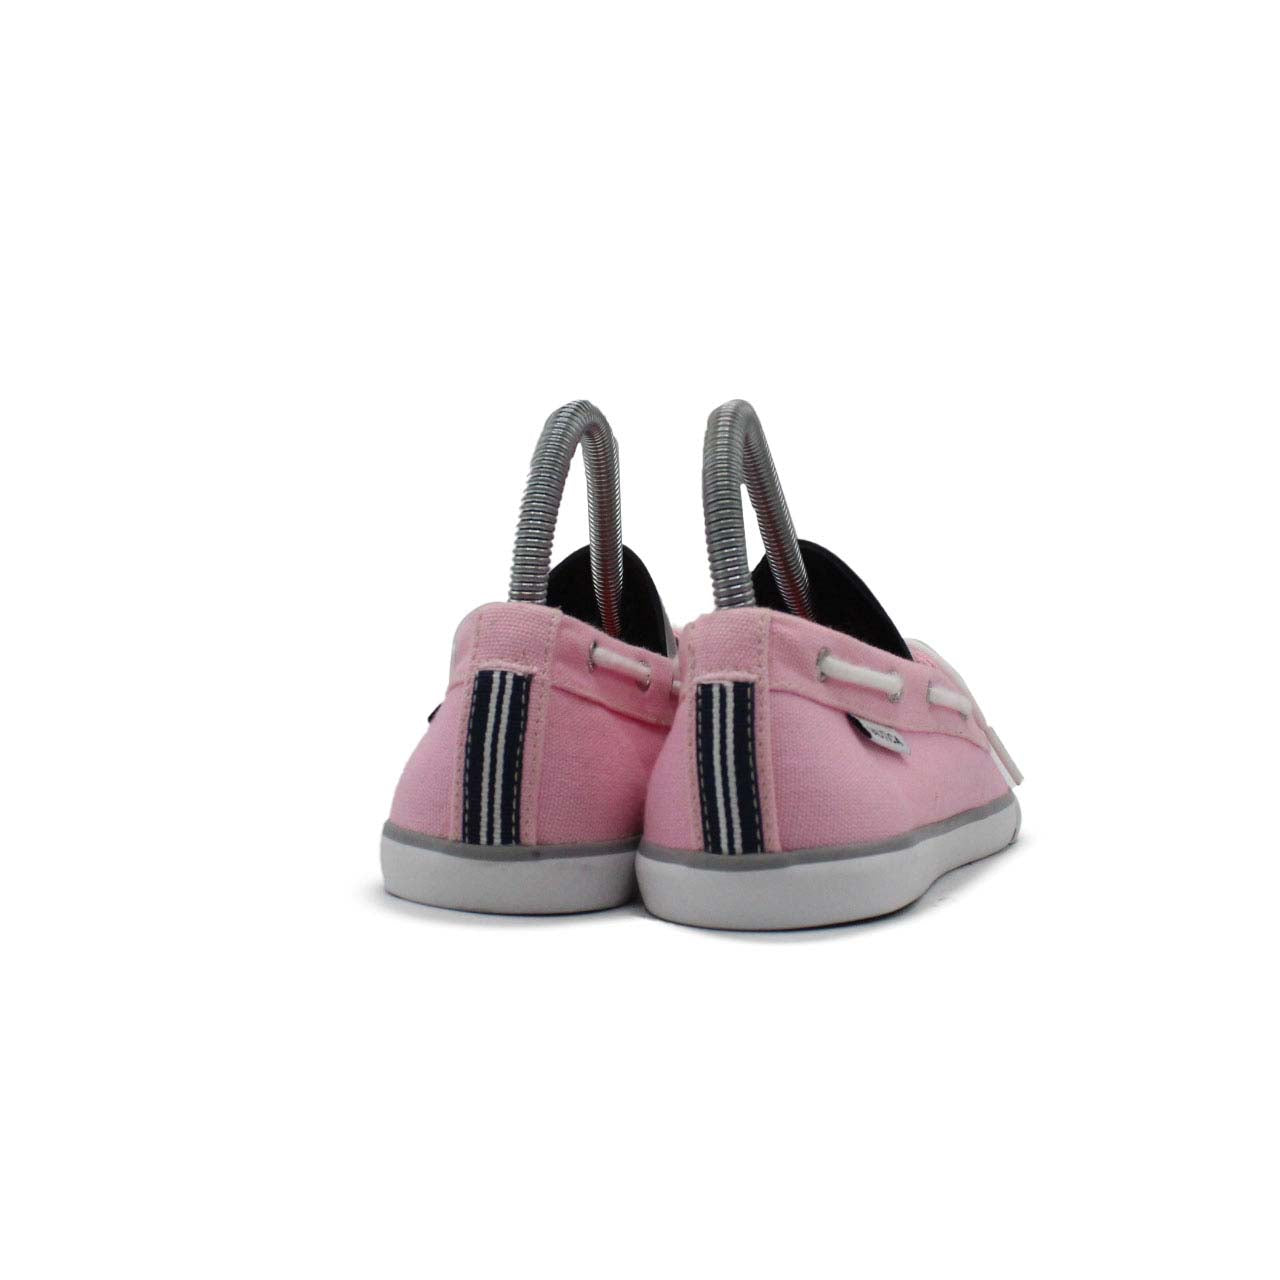 NAUTICA PINK CASUAL SHOES